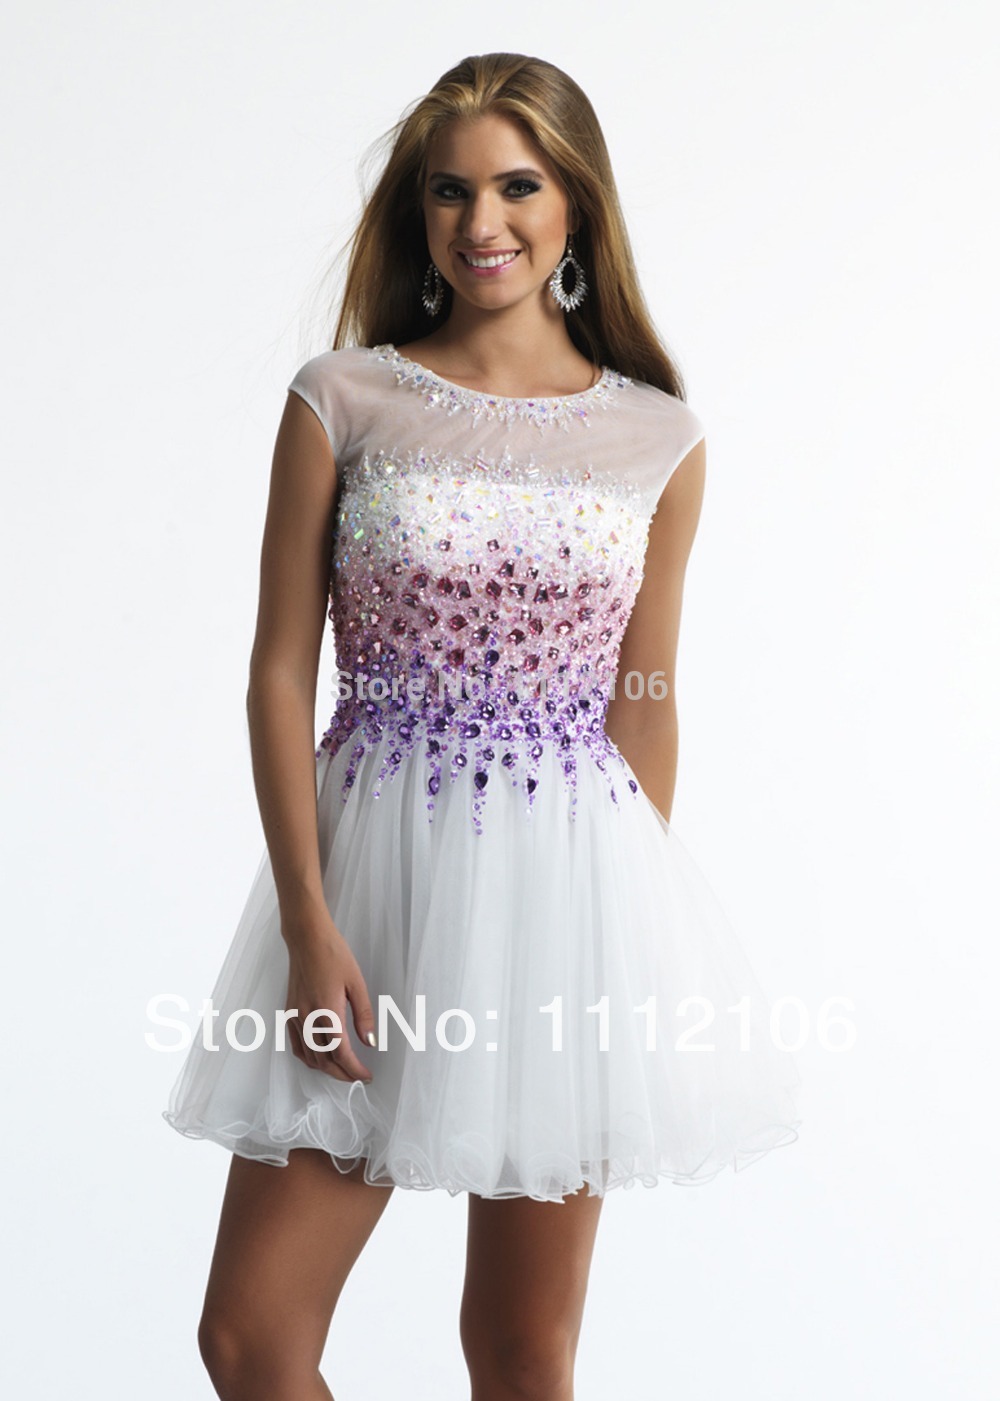 Cheap Homecoming Dresses with Cap Sleeves - Dress images